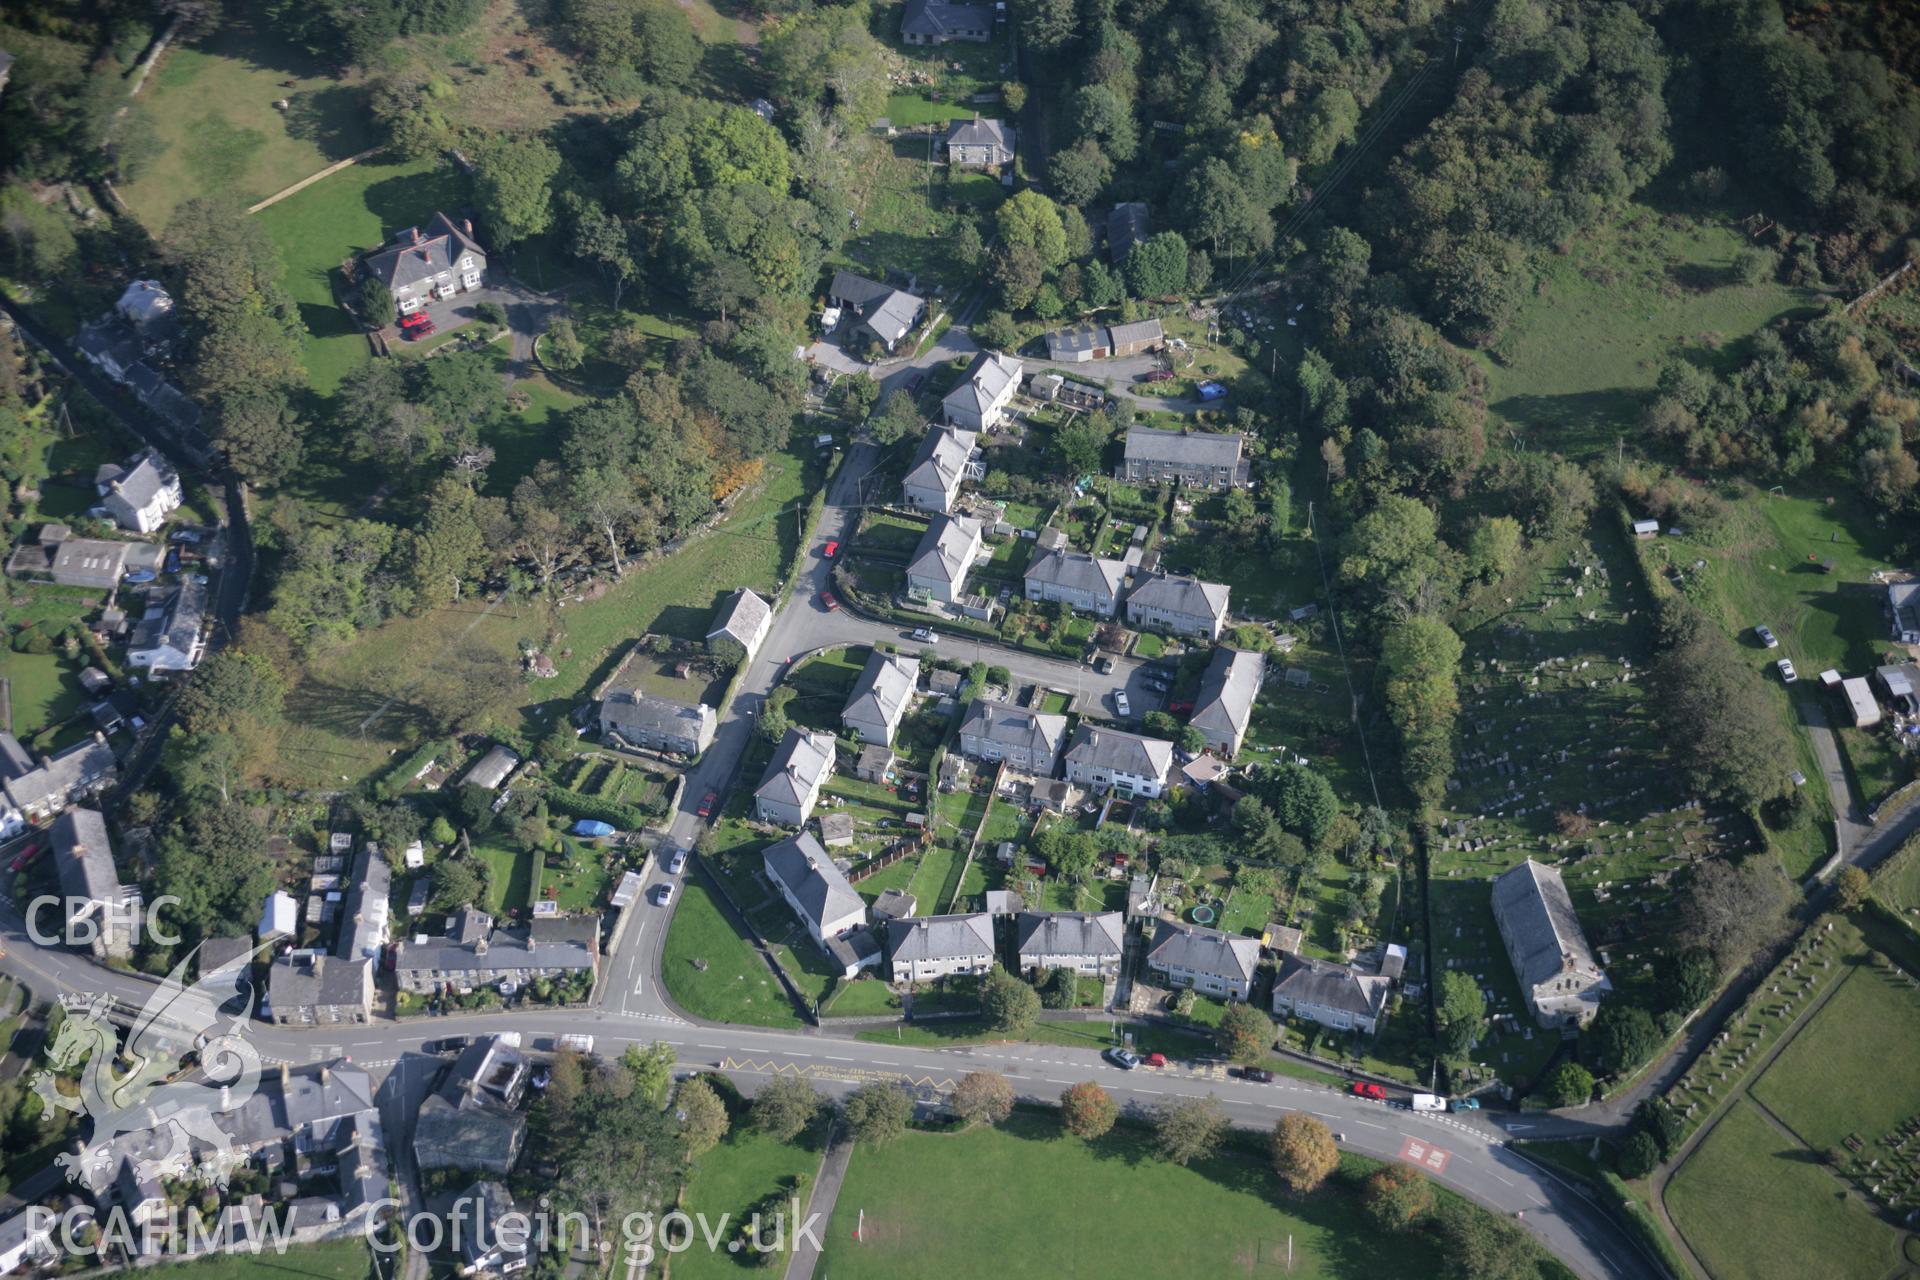 RCAHMW colour oblique aerial photograph of Llwyngwril village, viewed from the west. Taken on 17 October 2005 by Toby Driver